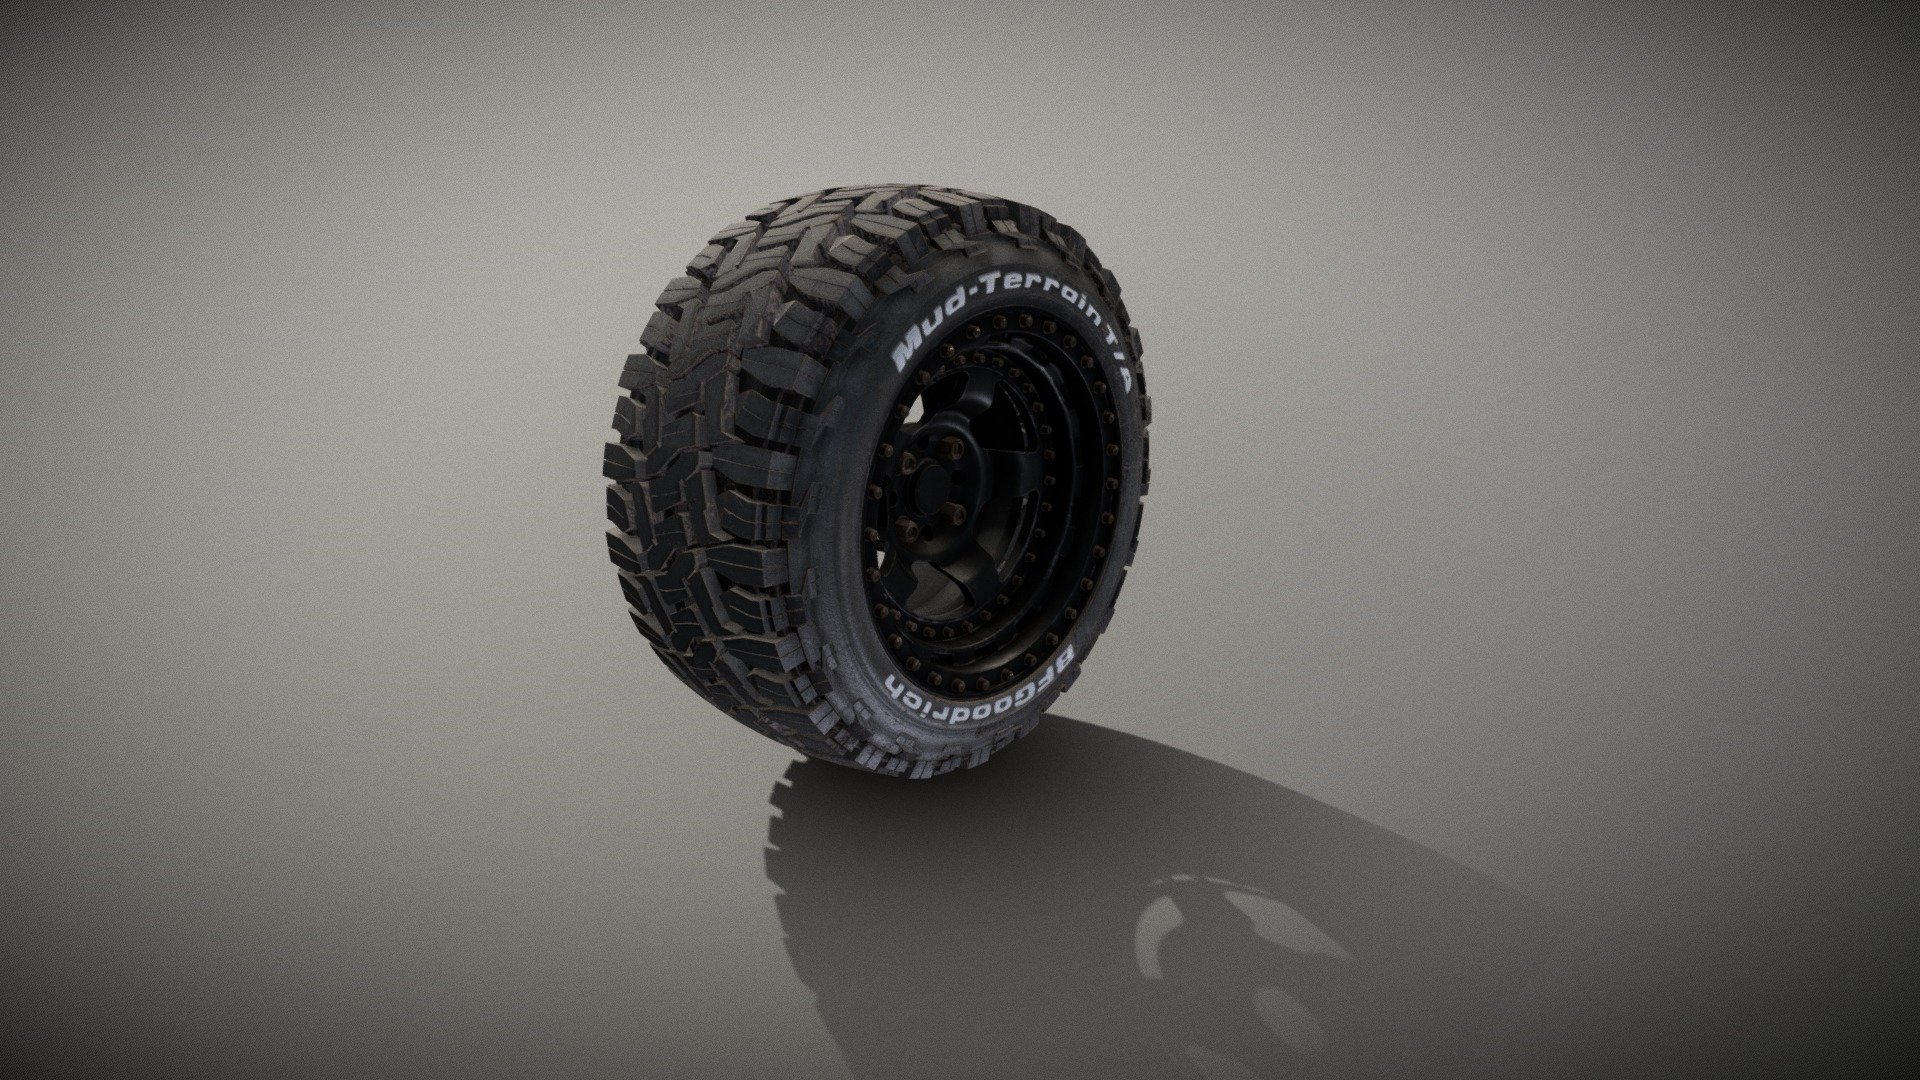 pbr textured model of a offroad tire with light dirt, mud and age details on it.
many details and realistic look makes this tire ideal for high quality animations or real time applications 3d model